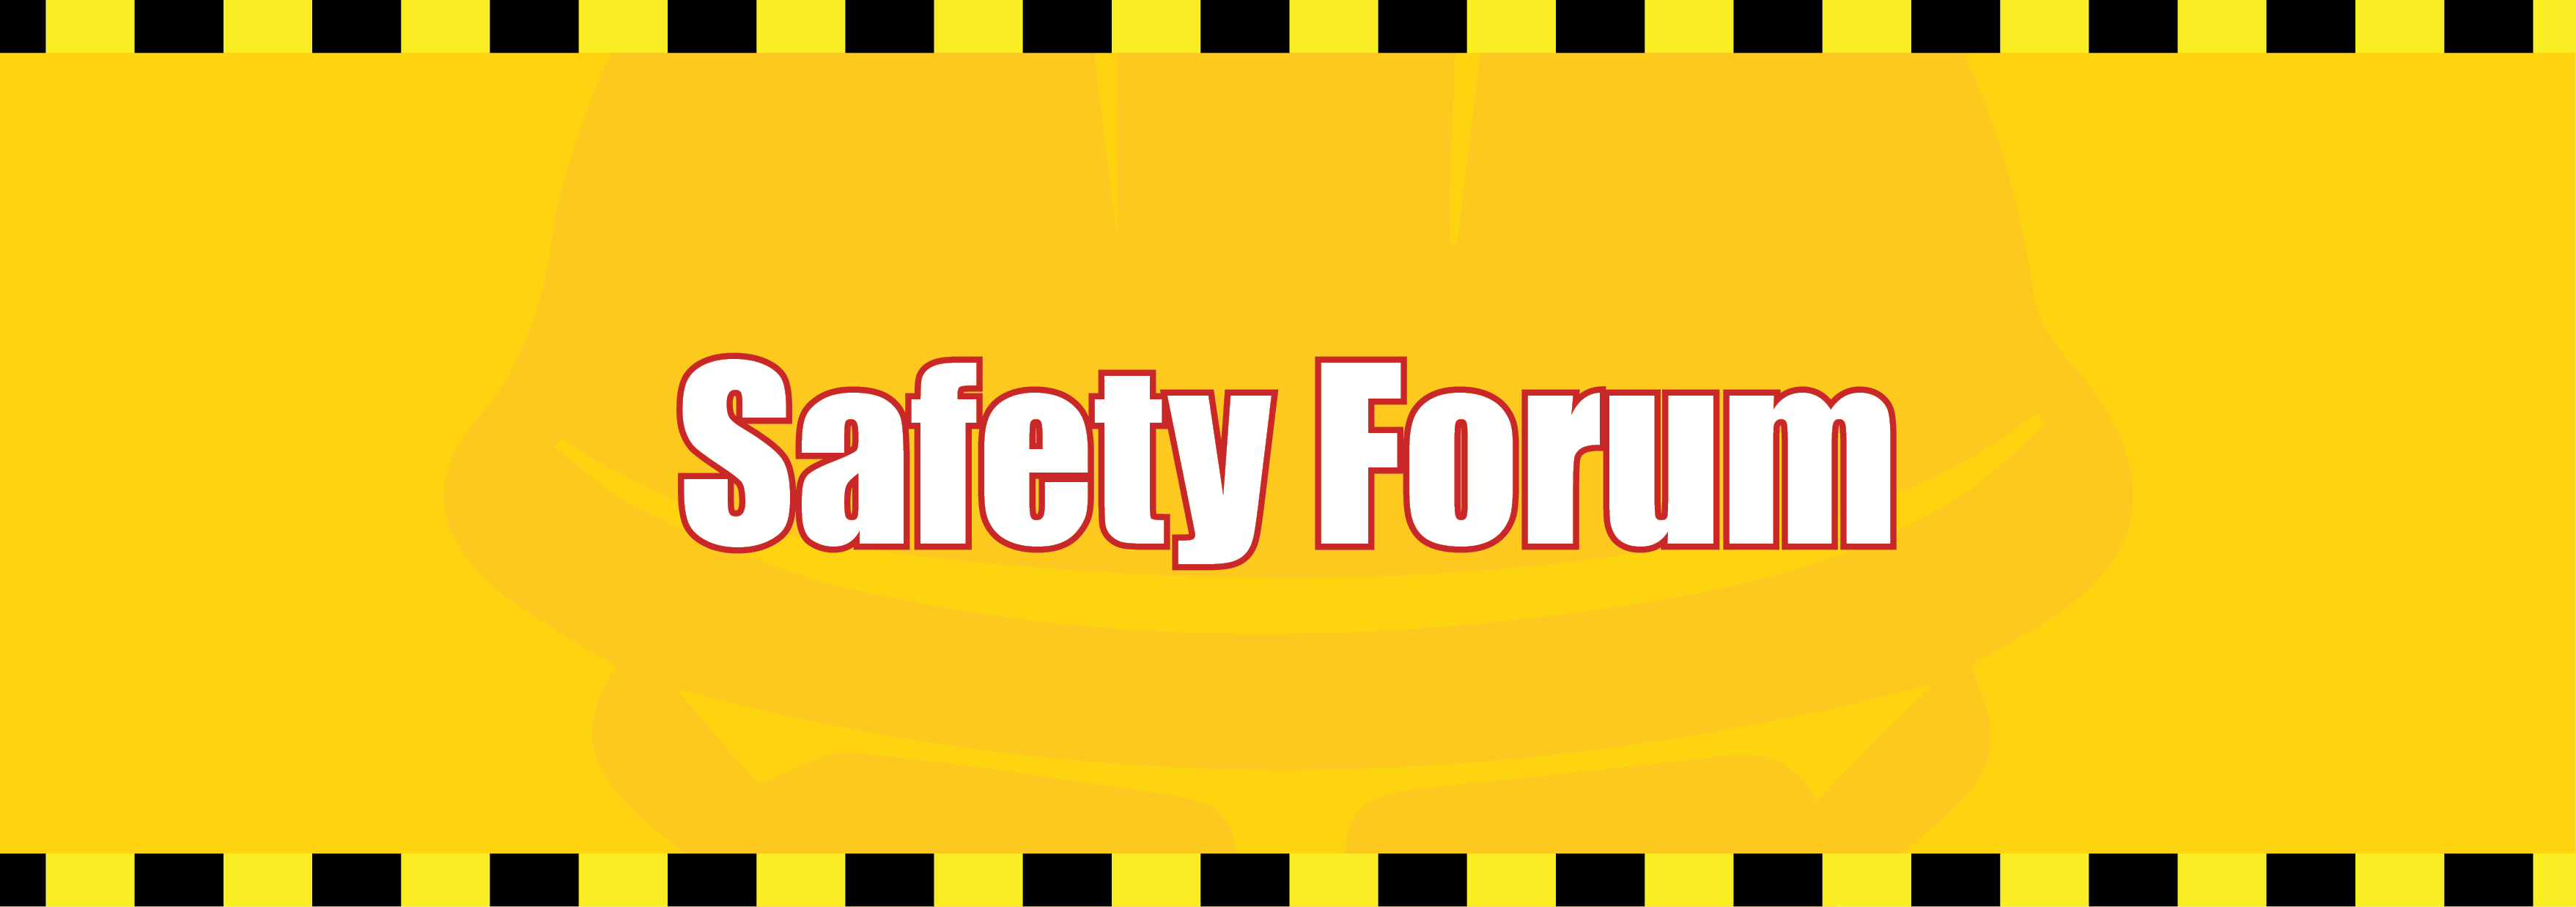 Monthly Safety Forum - Temp Power and Lighting